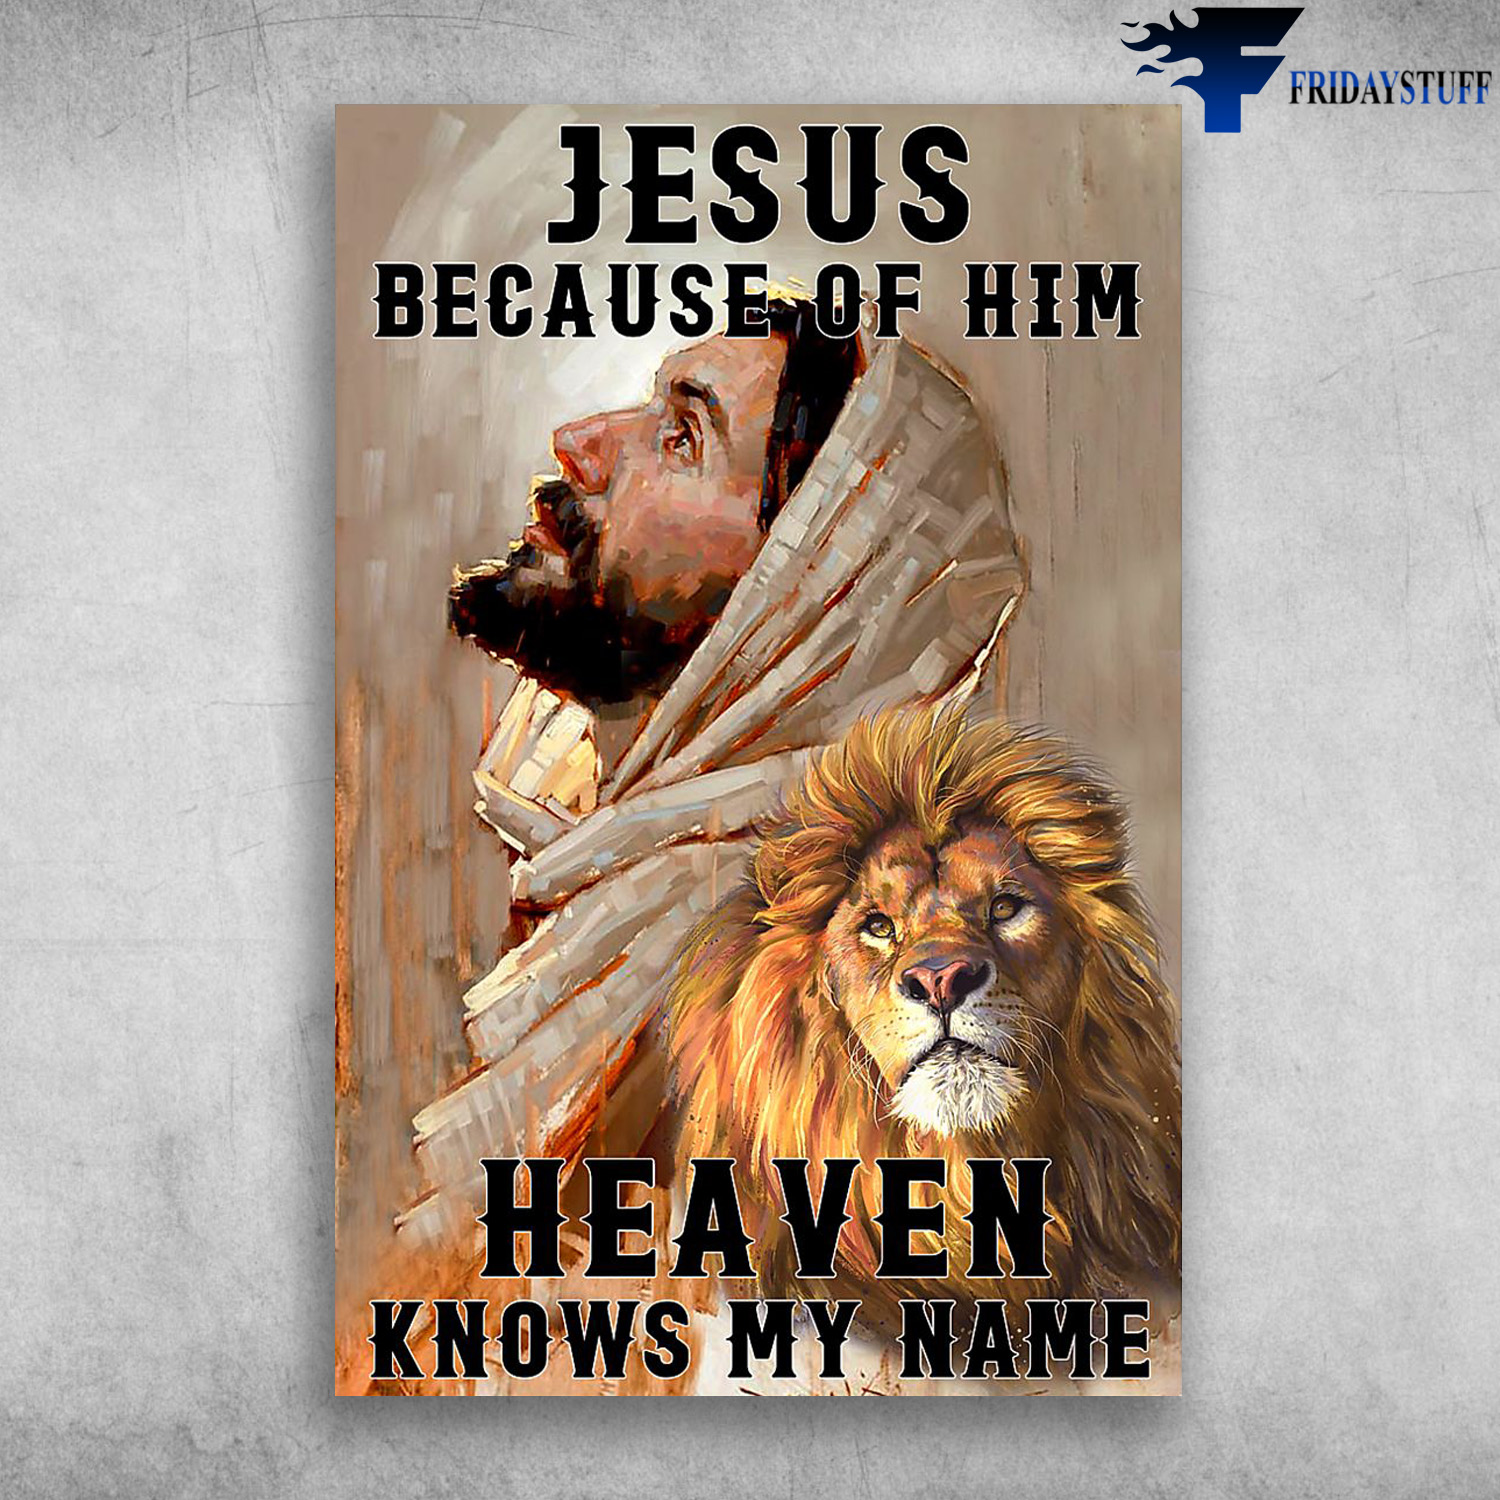 Jesus And Lion - Jesus Because OF Him, Heaven Knows My Name